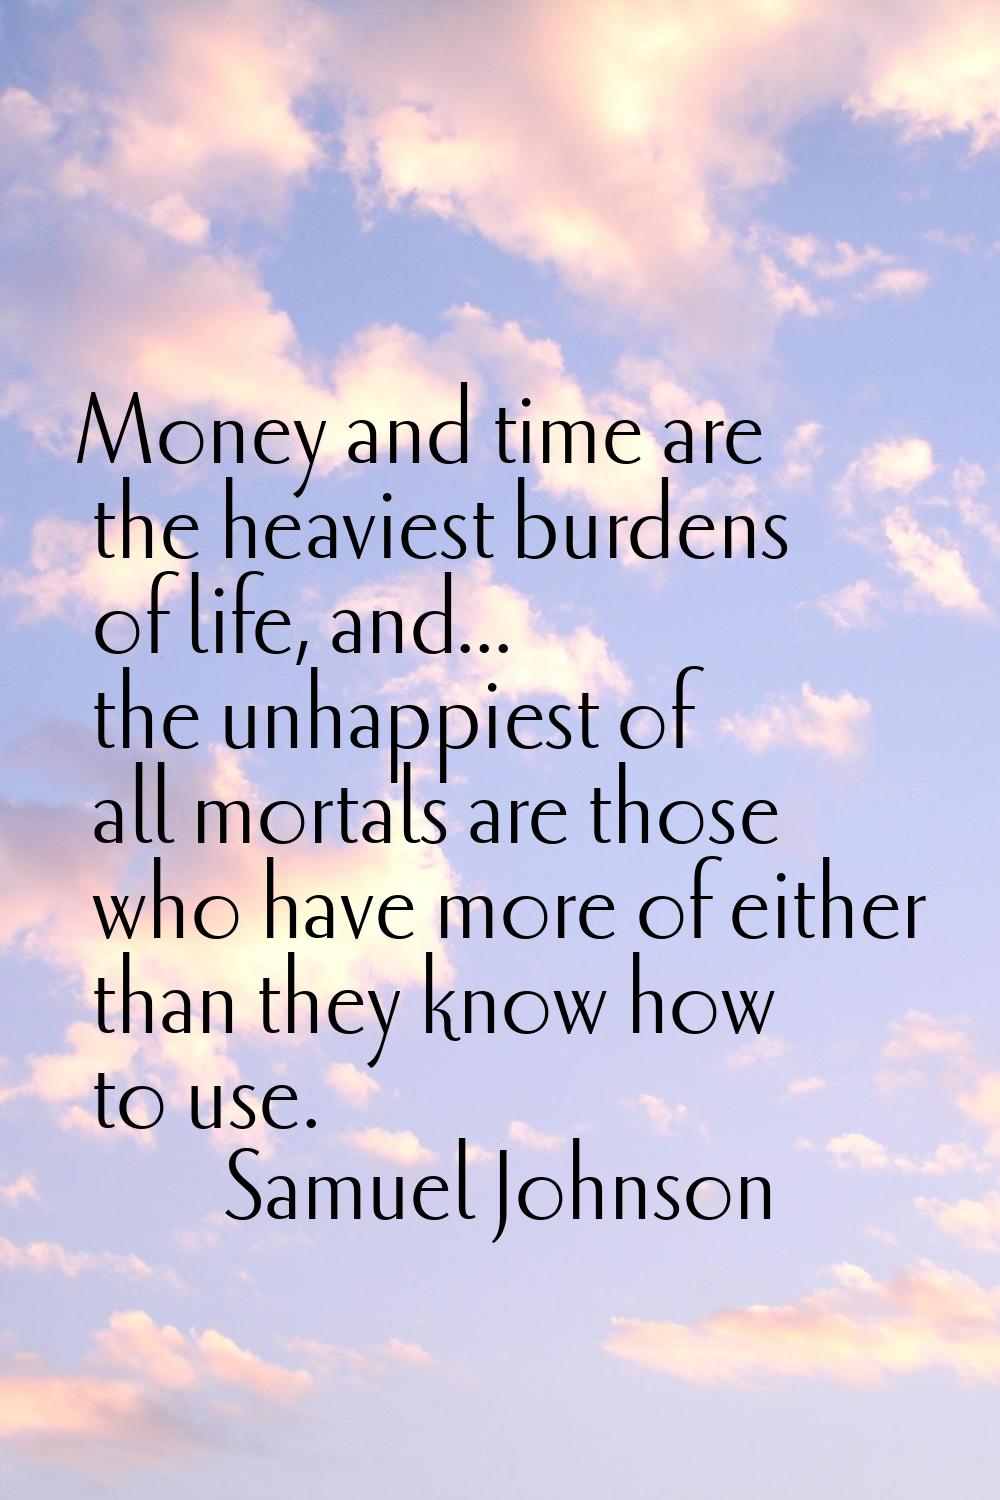 Money and time are the heaviest burdens of life, and... the unhappiest of all mortals are those who